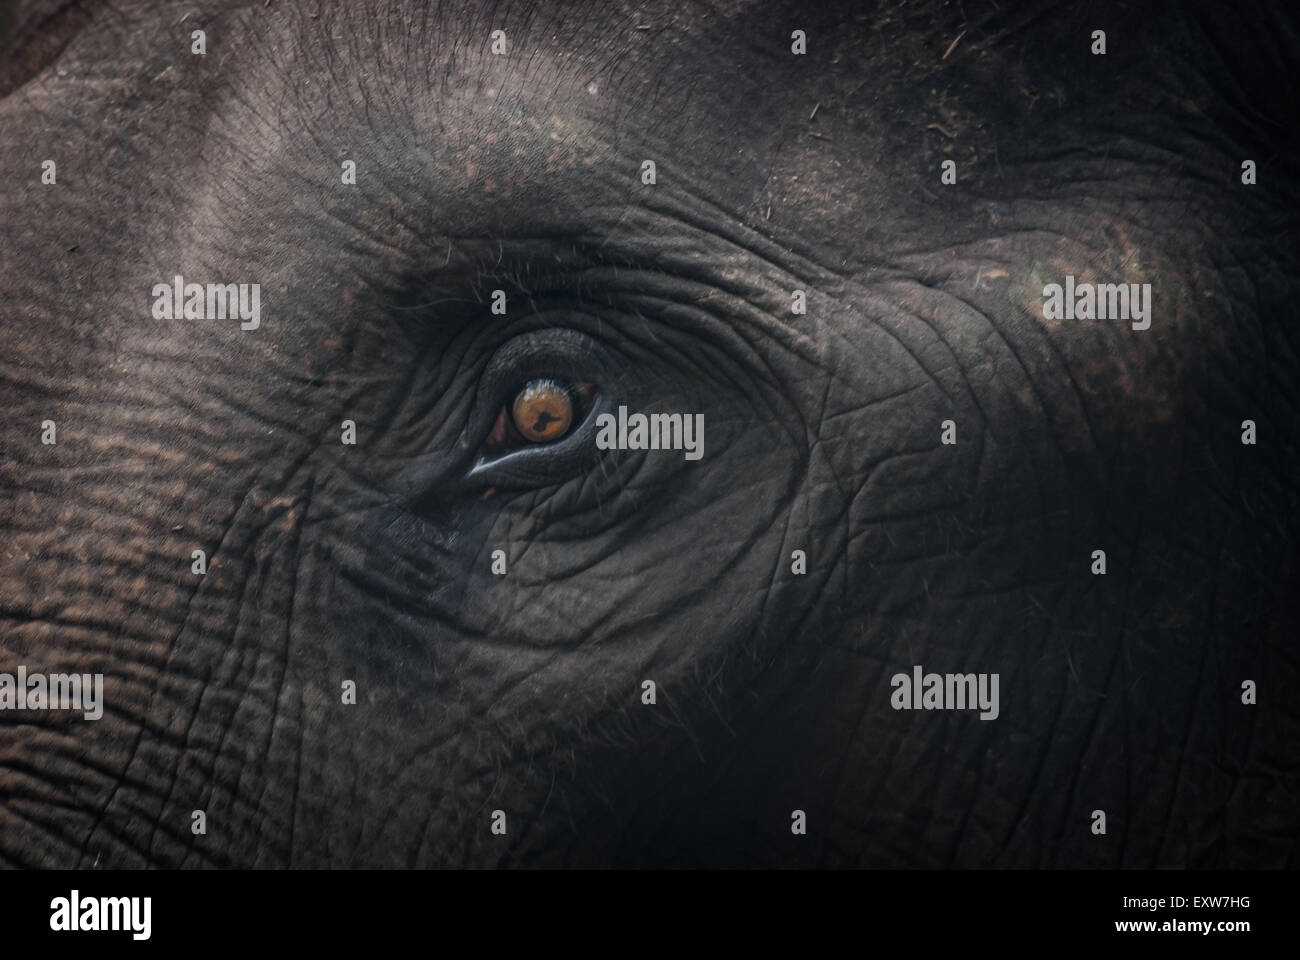 Details of a Sumatran elephant at an elephant camp managed by Conservation Response Unit (CRU)—Gunung Leuser National Park, in Sumatra, Indonesia. Stock Photo